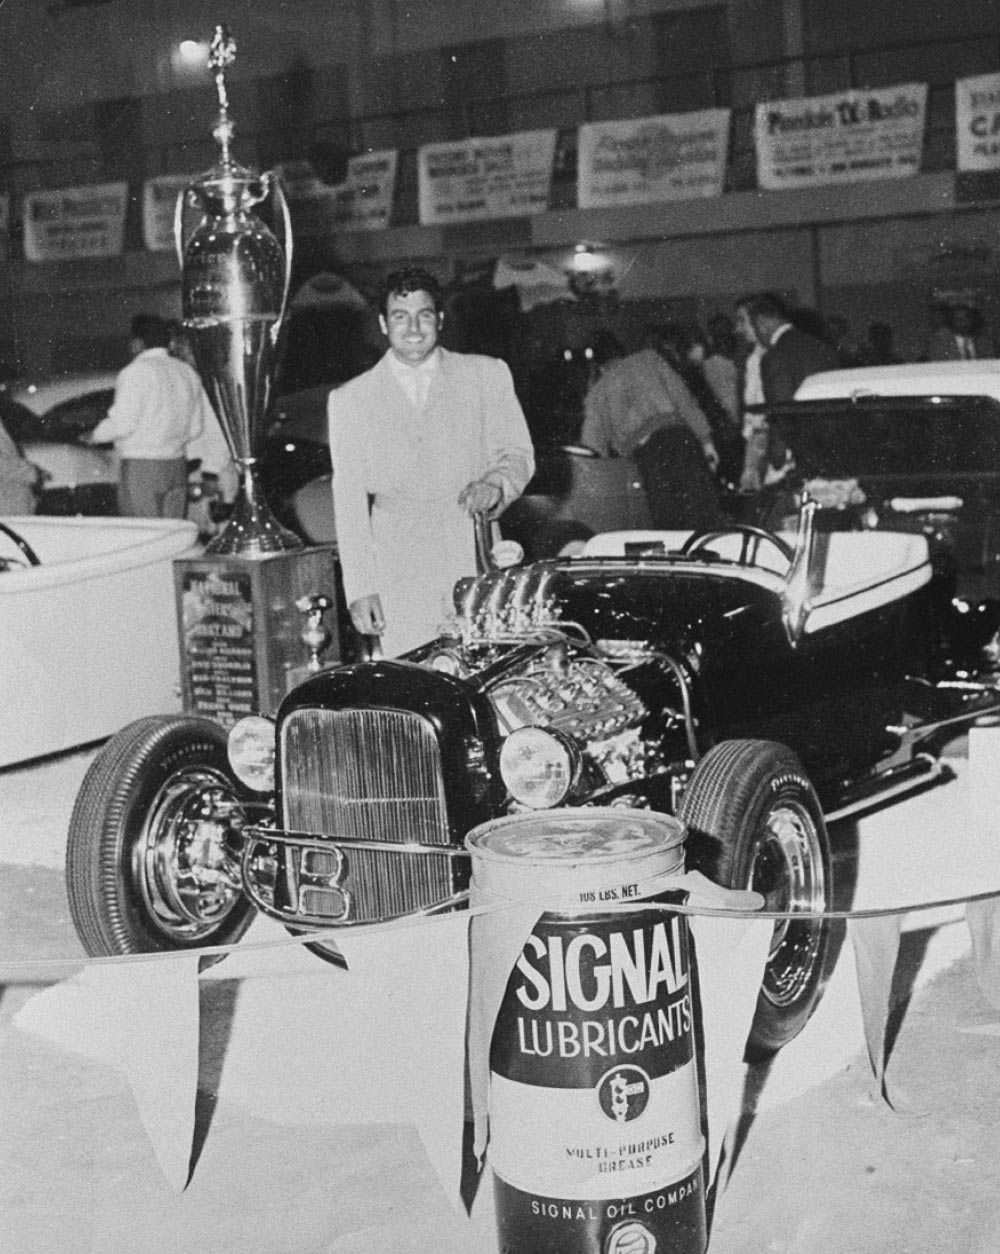 A resplendent Mr. Gejeian styles up to pose with the big AMBR trophy at Oakland, 1955